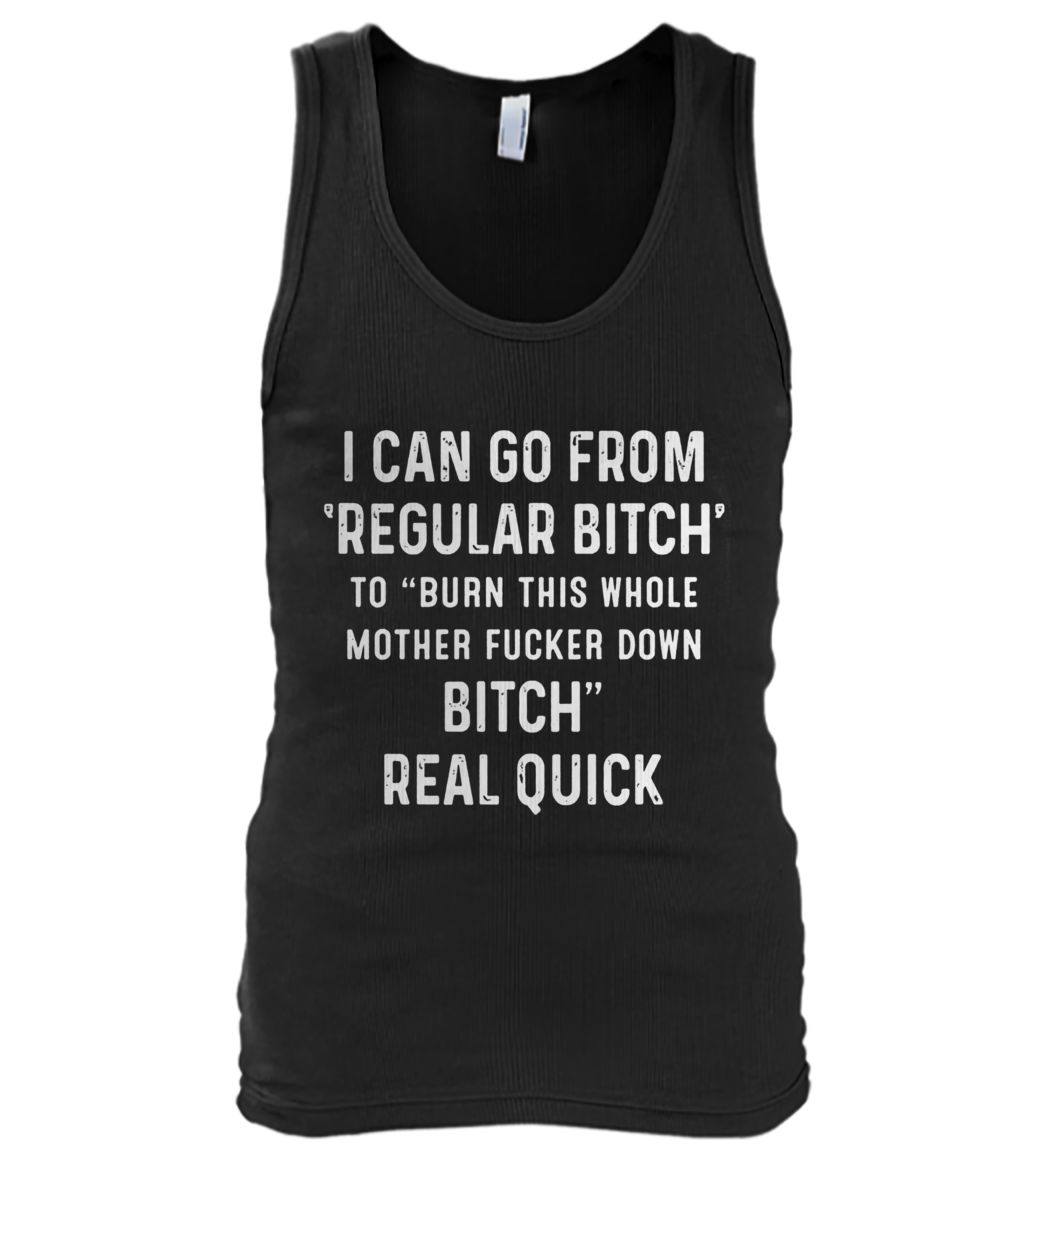 I can go from regular bitch to burn this whole mother fucker down bitch real quick men's tank top